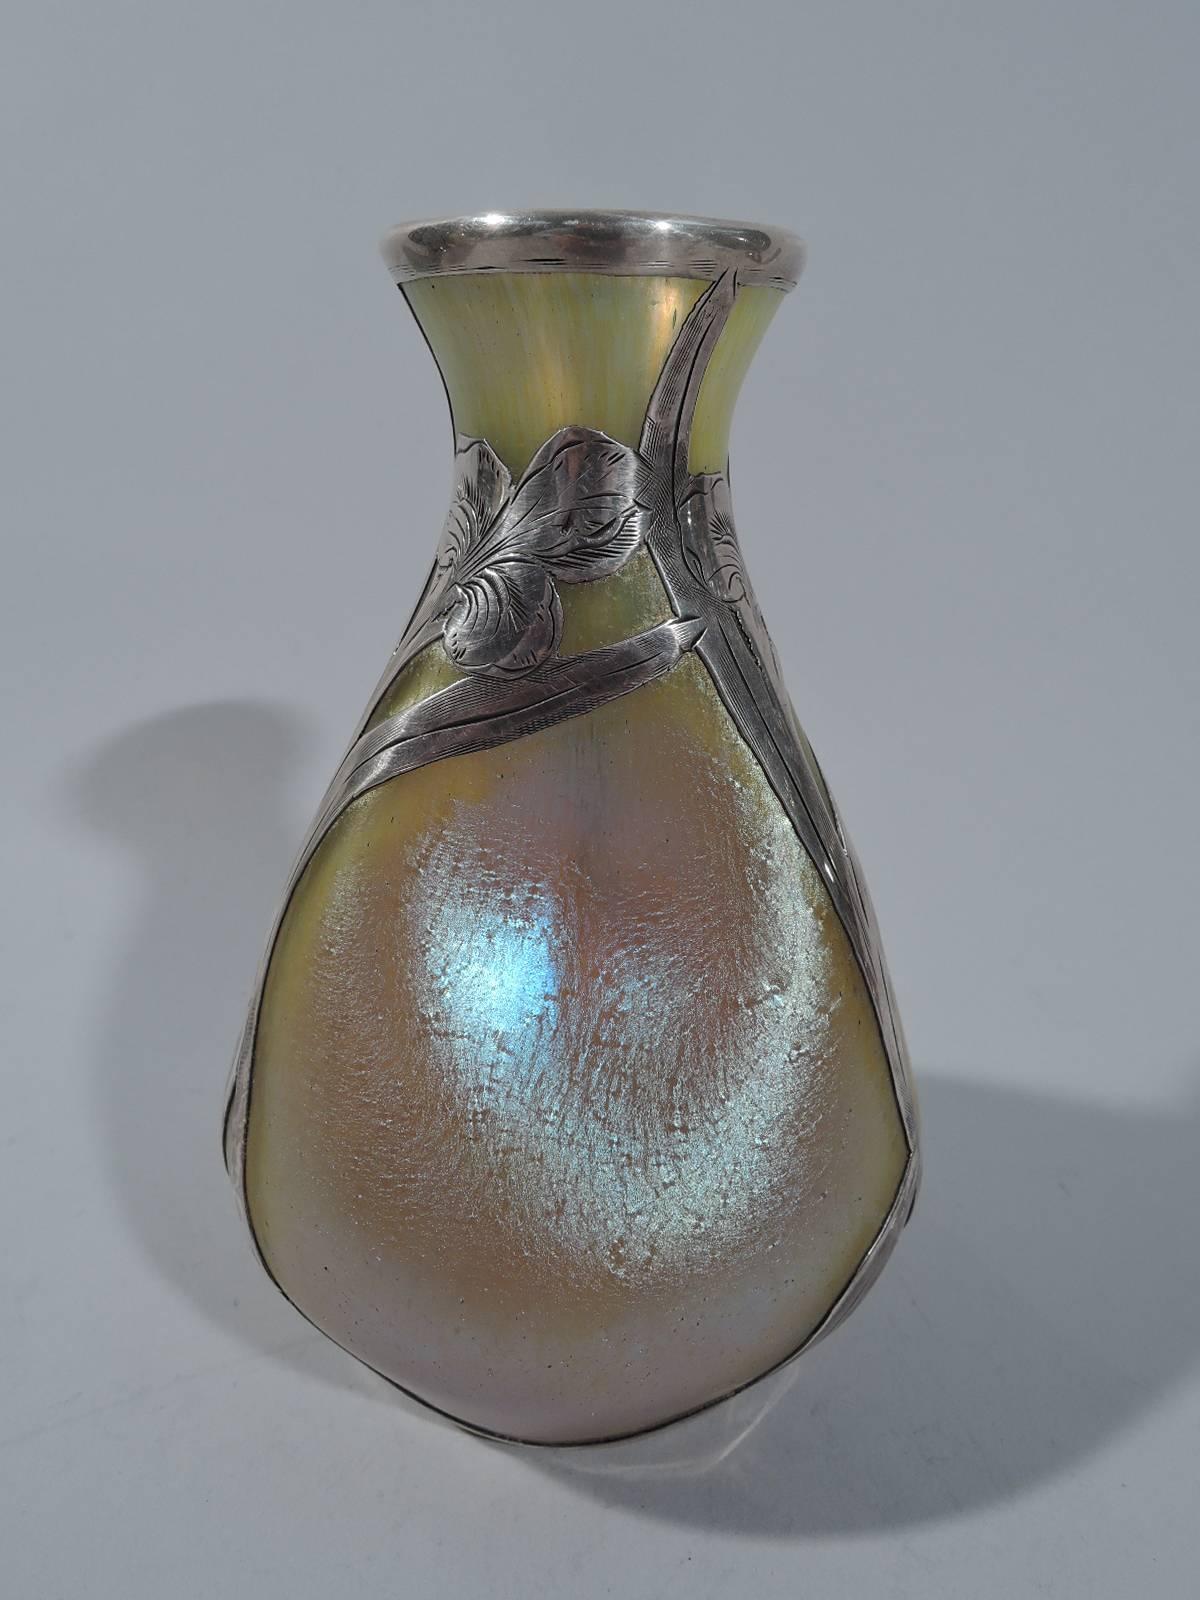 Iridescent gold vase with silver overlay. Made by Alvin in Providence, circa 1900. Pinched and ovoid with overlay frames in form of flowers and leaves. A restrained period design that shows off the rich and shimmering glass. Hallmark includes no.